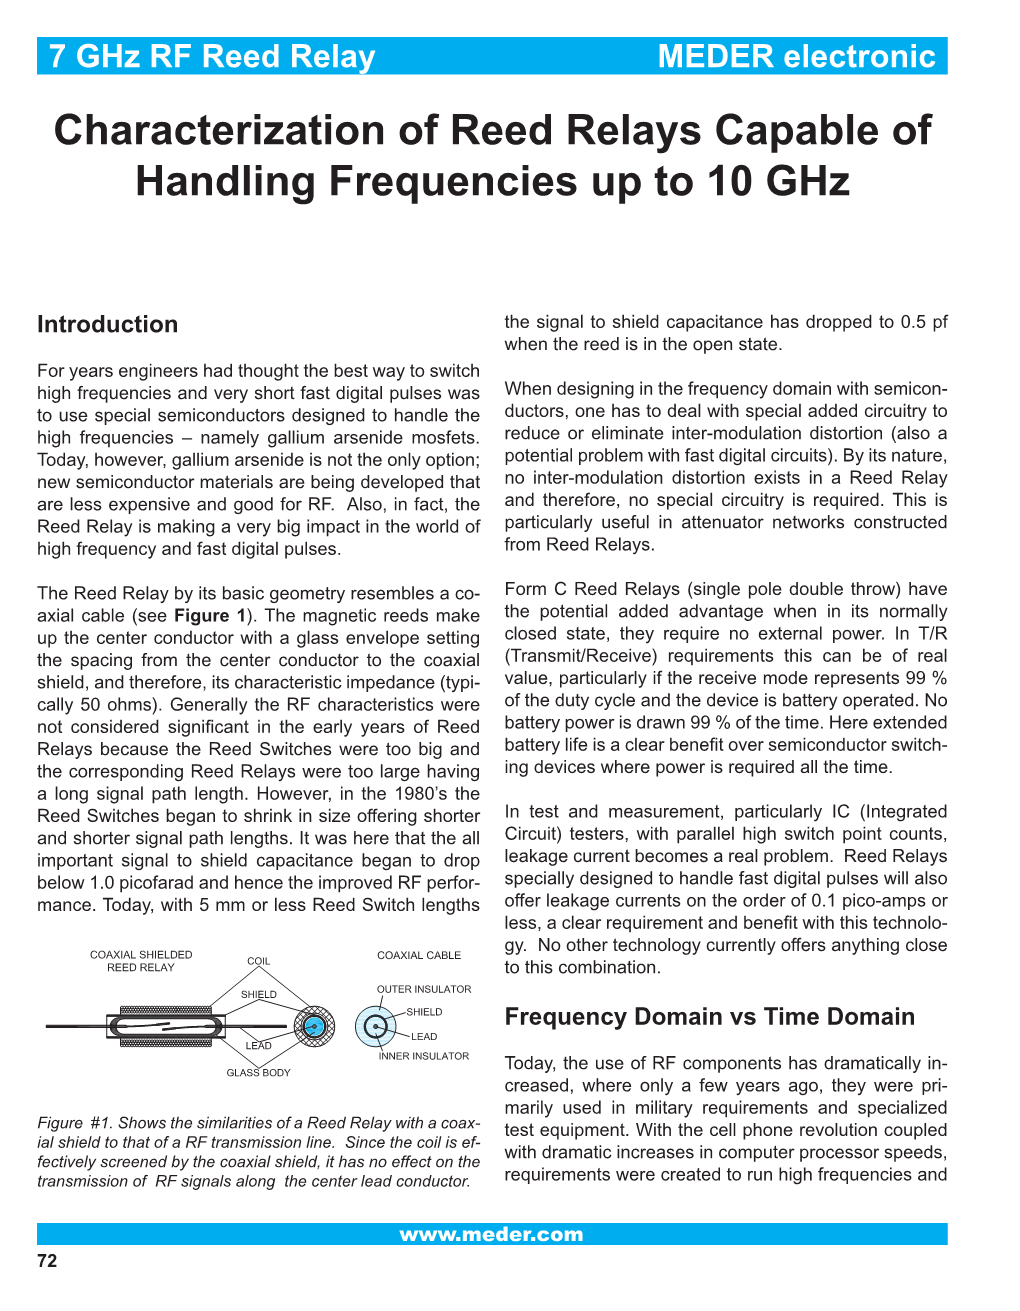 Characterization of Reed Relays Capable of Handling Frequencies up to 10 Ghz